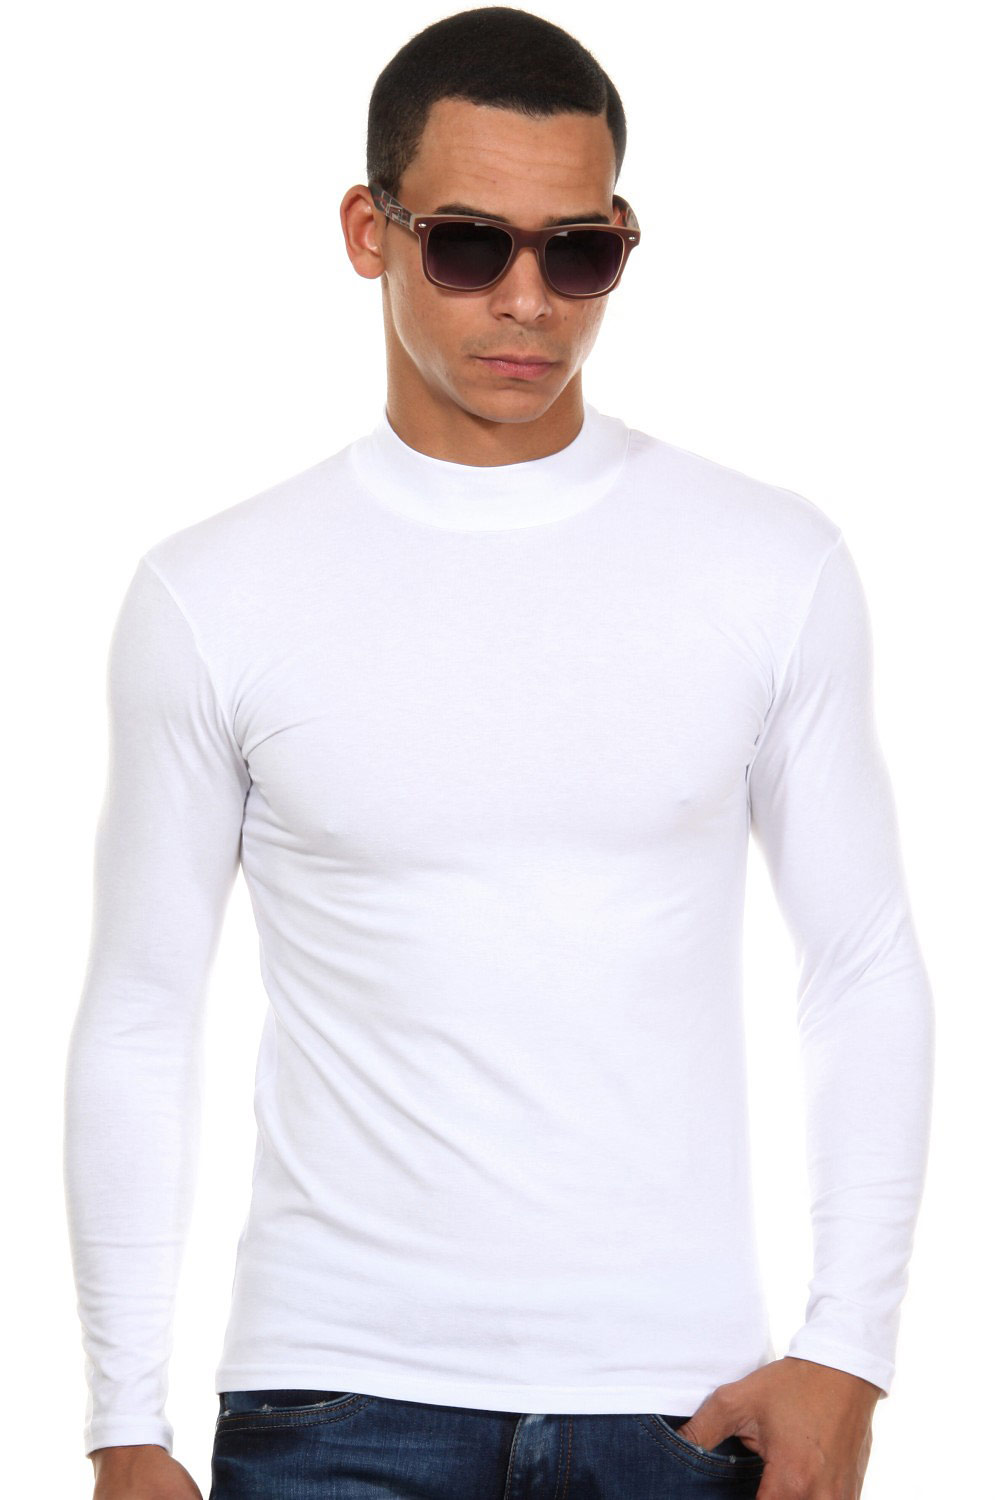 DOREANSE long sleeve top turtle neck slim fit at oboy.com